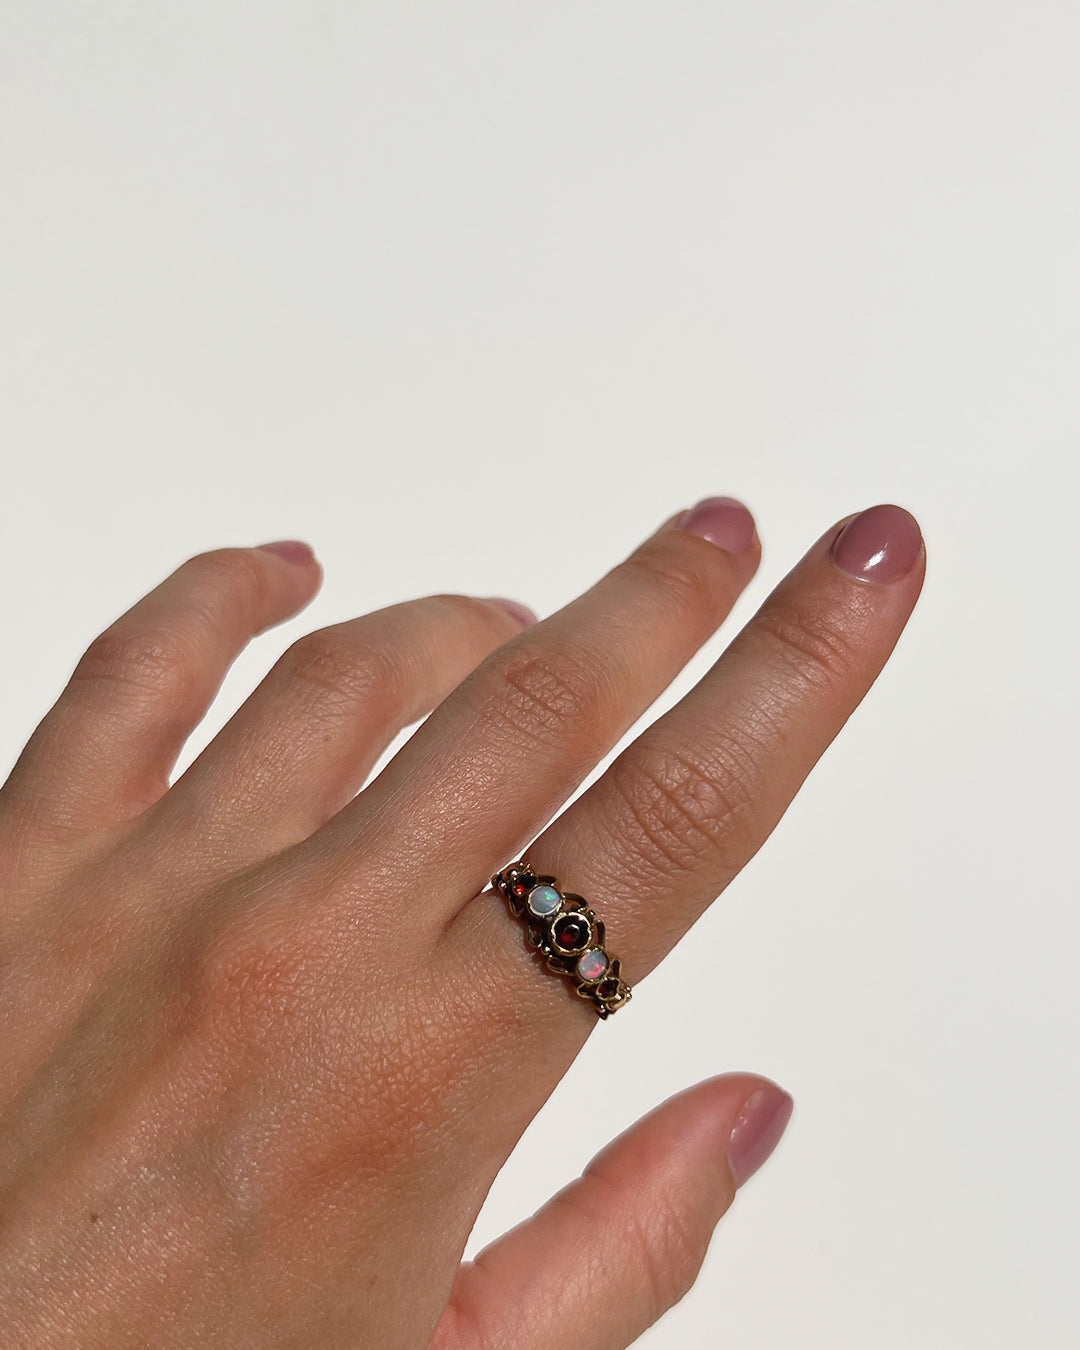 ORNATE GARNET AND OPAL RING, 9CT GOLD